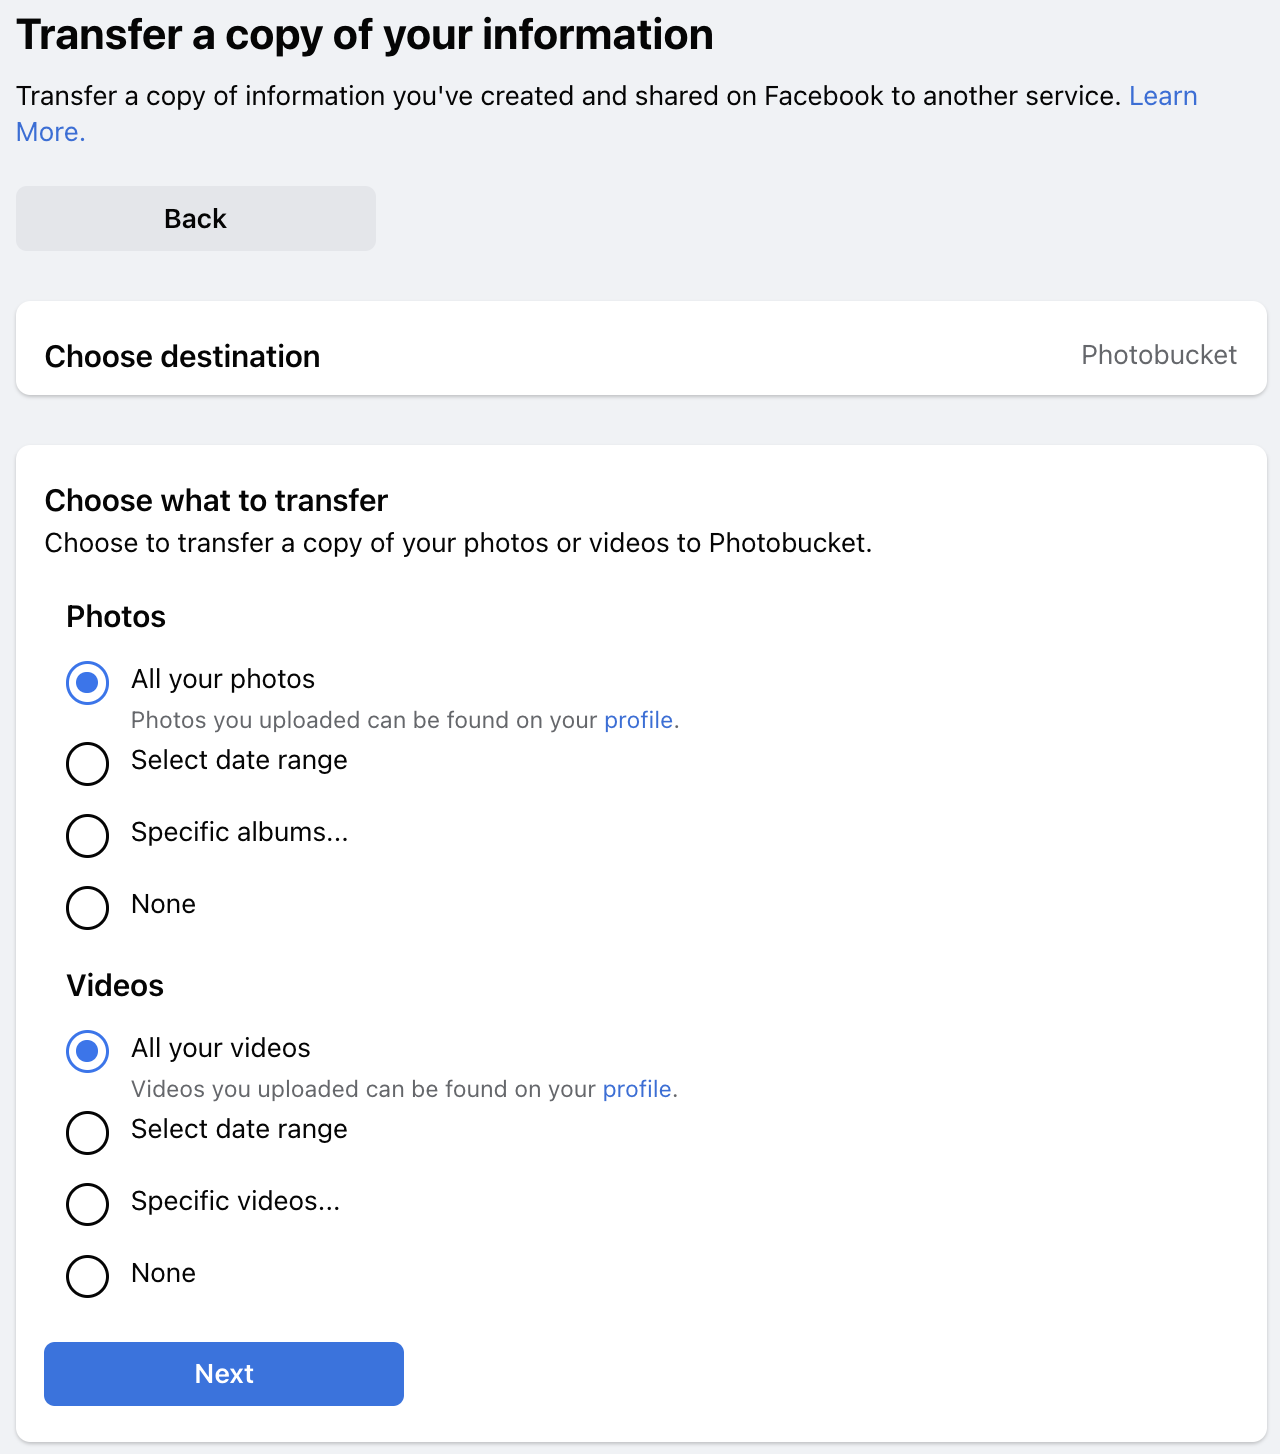 Transfer a copy of your information screen in Facebook